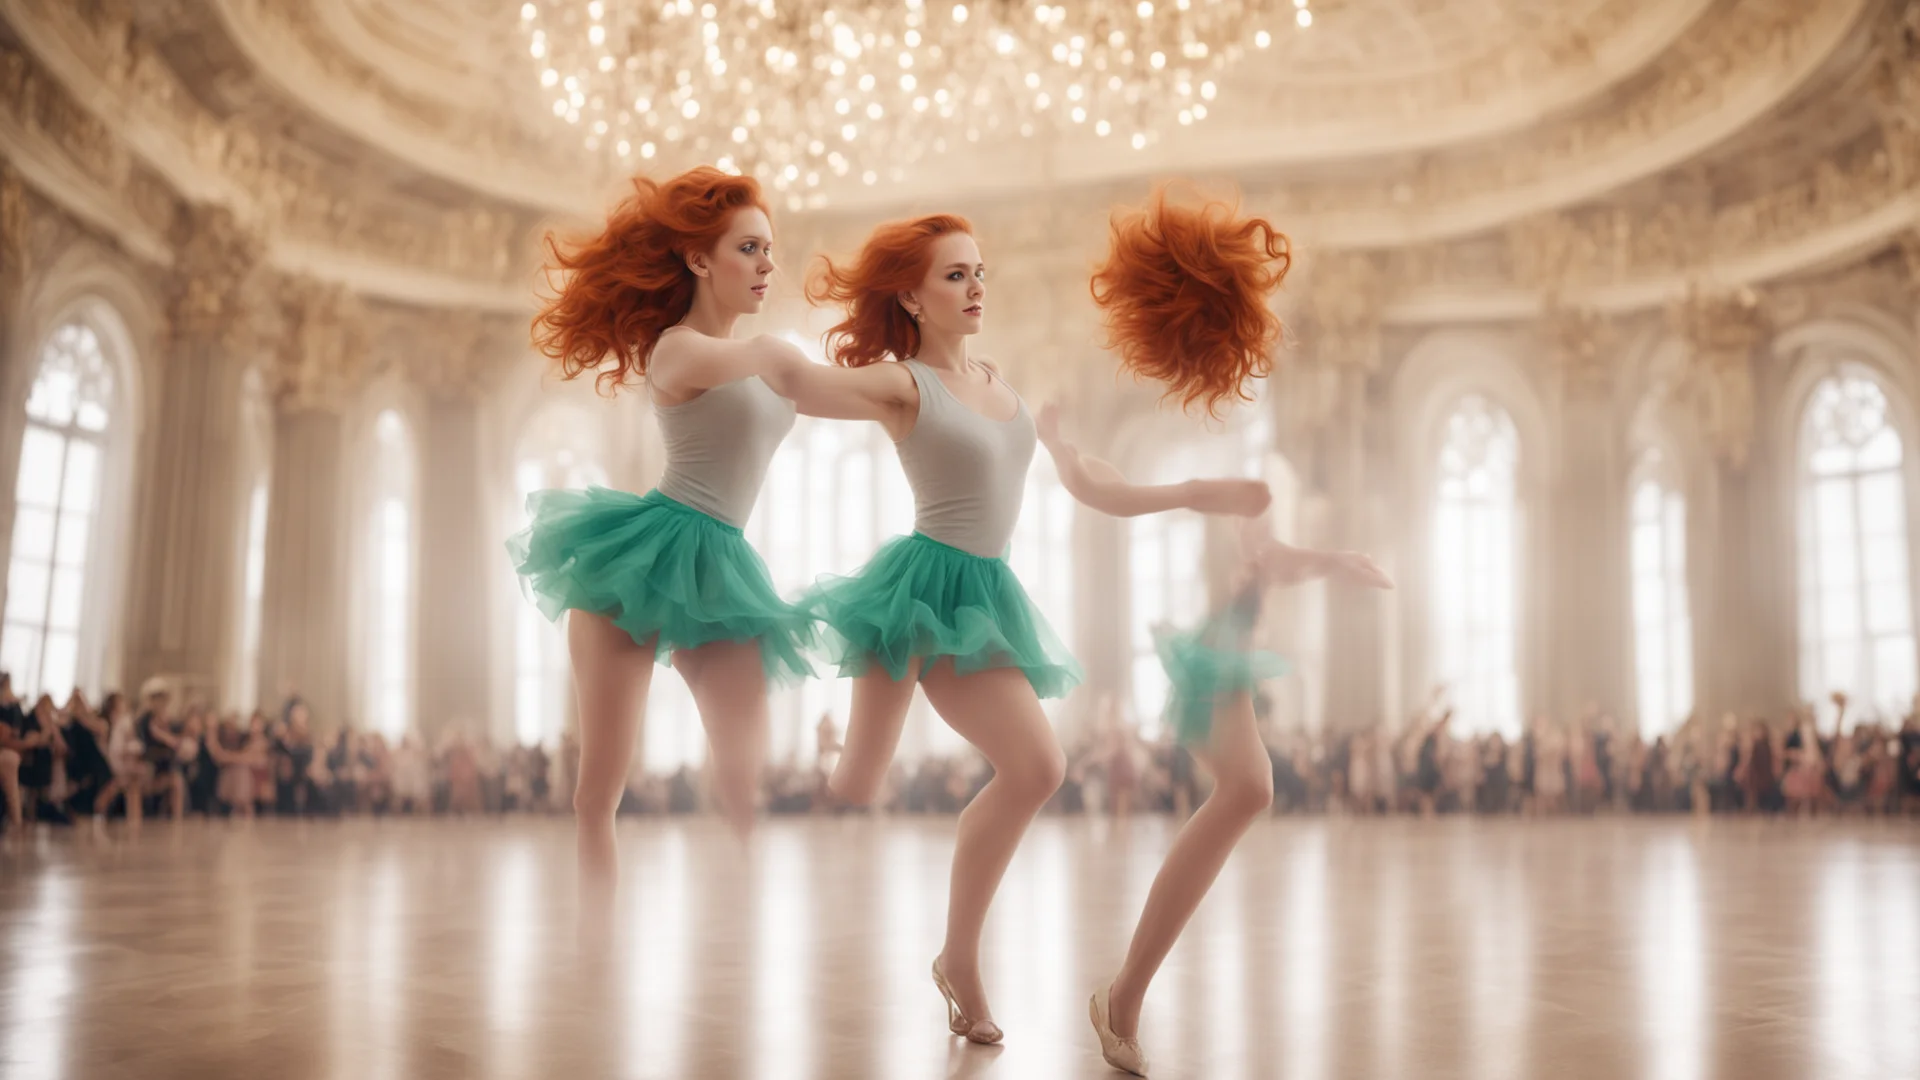 aia ginger haired girl with short skirt dancing in a gigantic ballroom amazing awesome portrait 2 wide